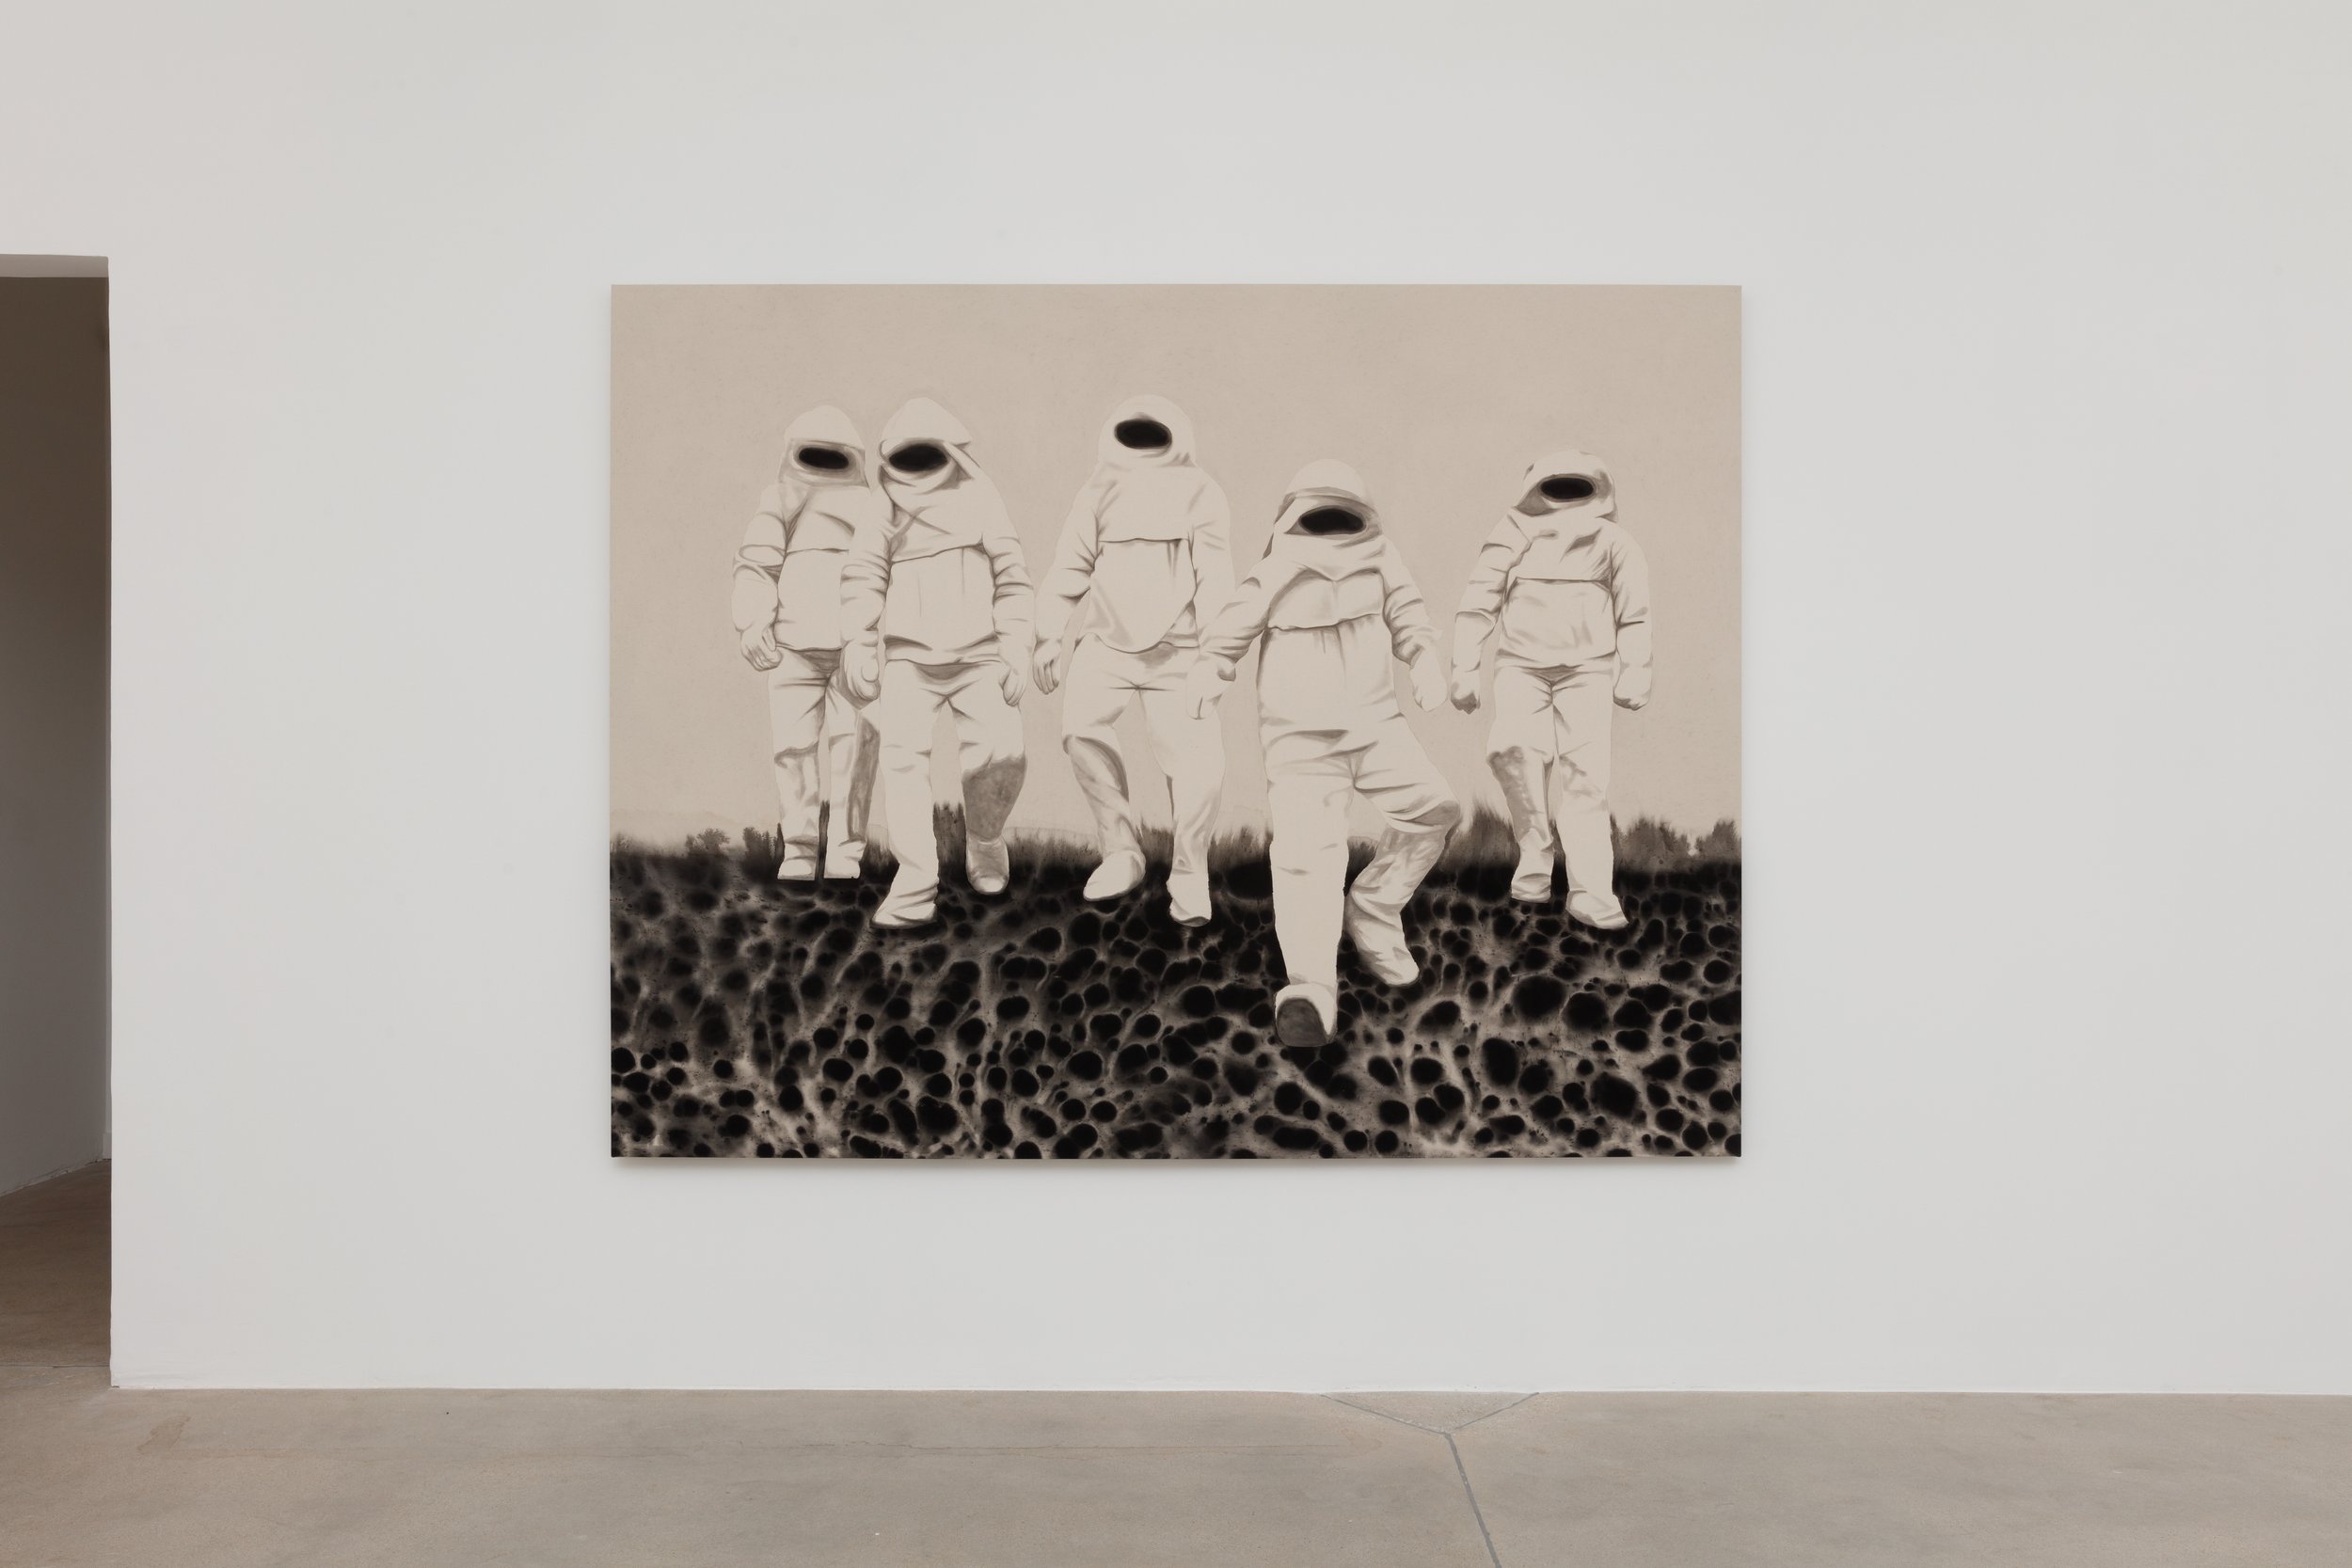   Not Yet Titled , 2020/2022 Black gesso on canvas 102 x 76 inches (2.59m x 1.93m) 